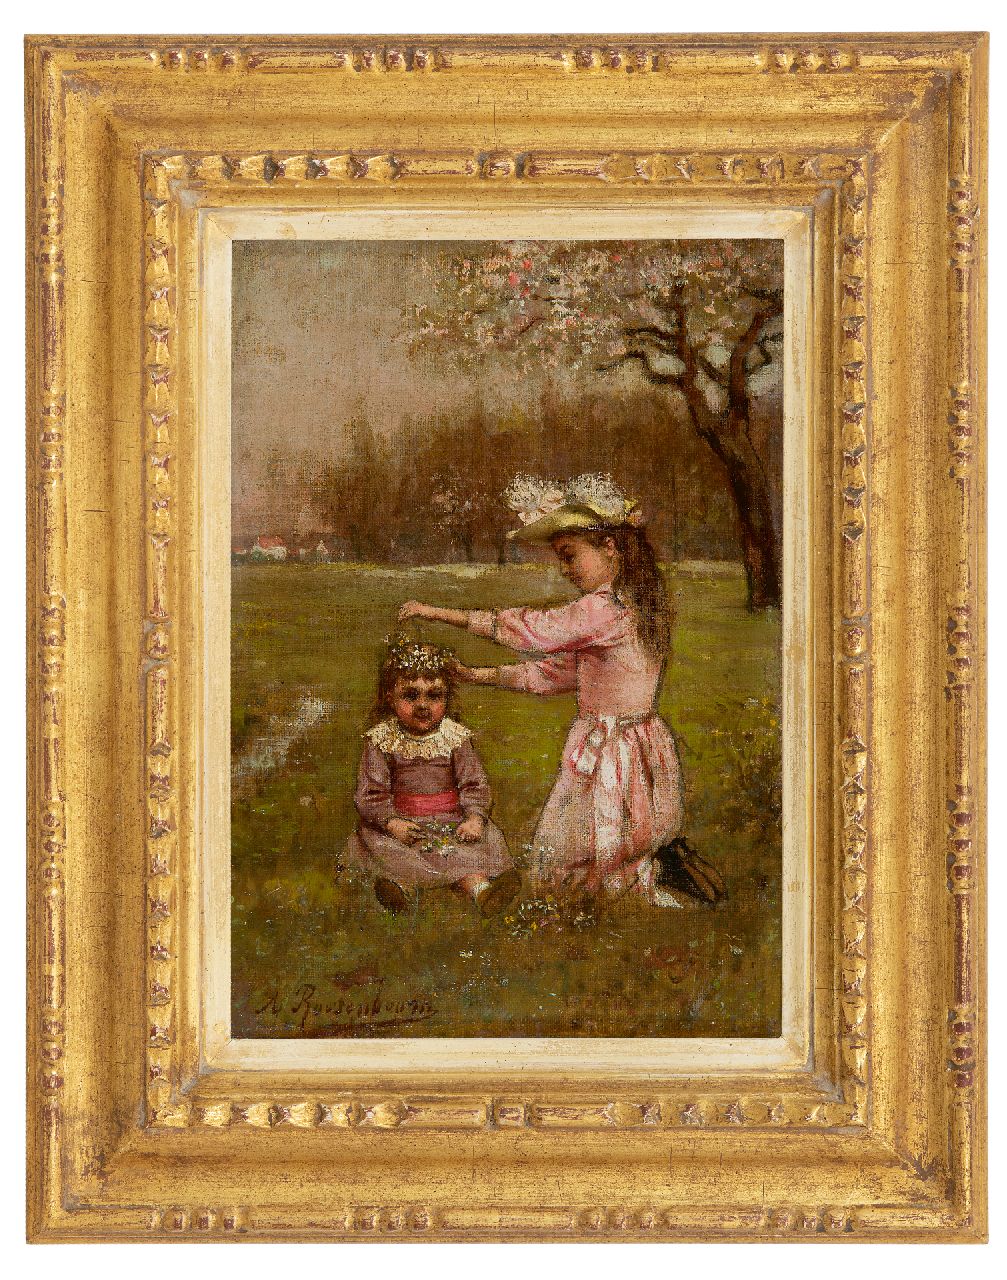 Roosenboom A.  | Albert Roosenboom | Paintings offered for sale | The flower garland, oil on canvas 26.2 x 18.3 cm, signed l.l.